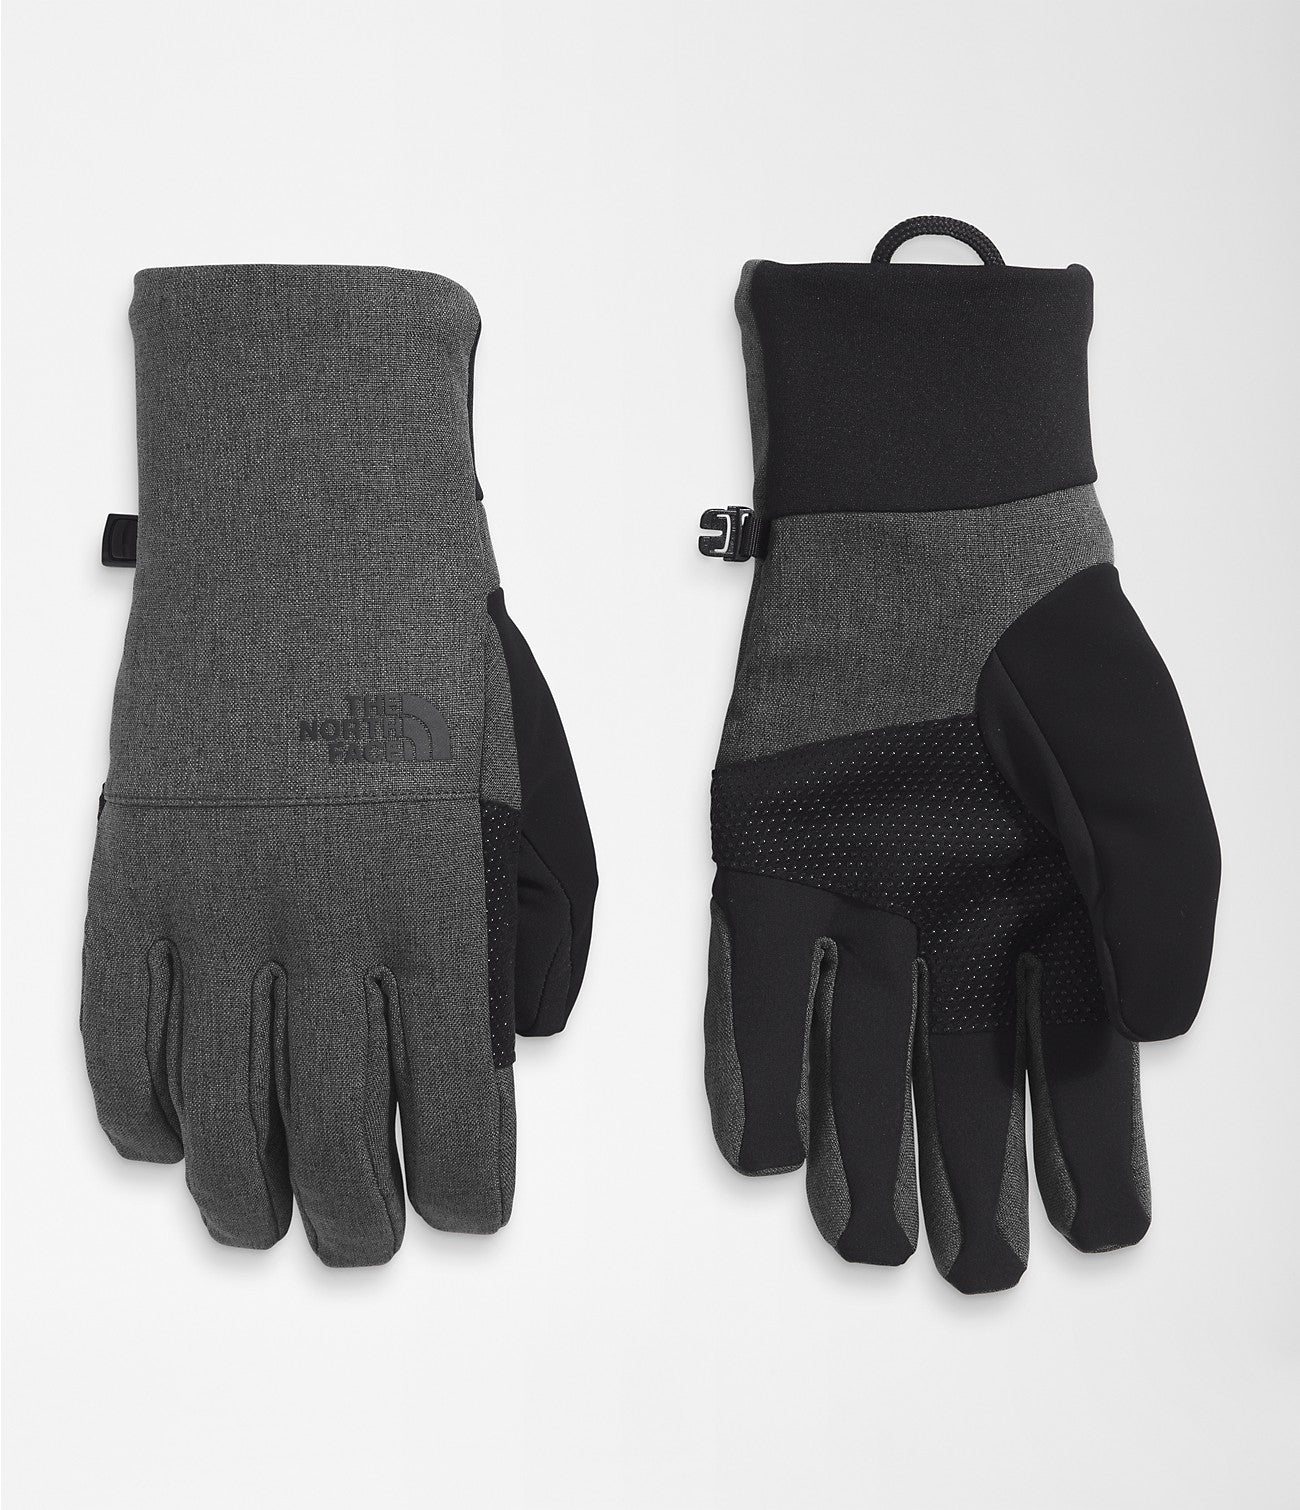 Mens Apex Insulated Etip Glove Village Ski Hut The North Face Adult Gloves/Mitts, softgoods accessories